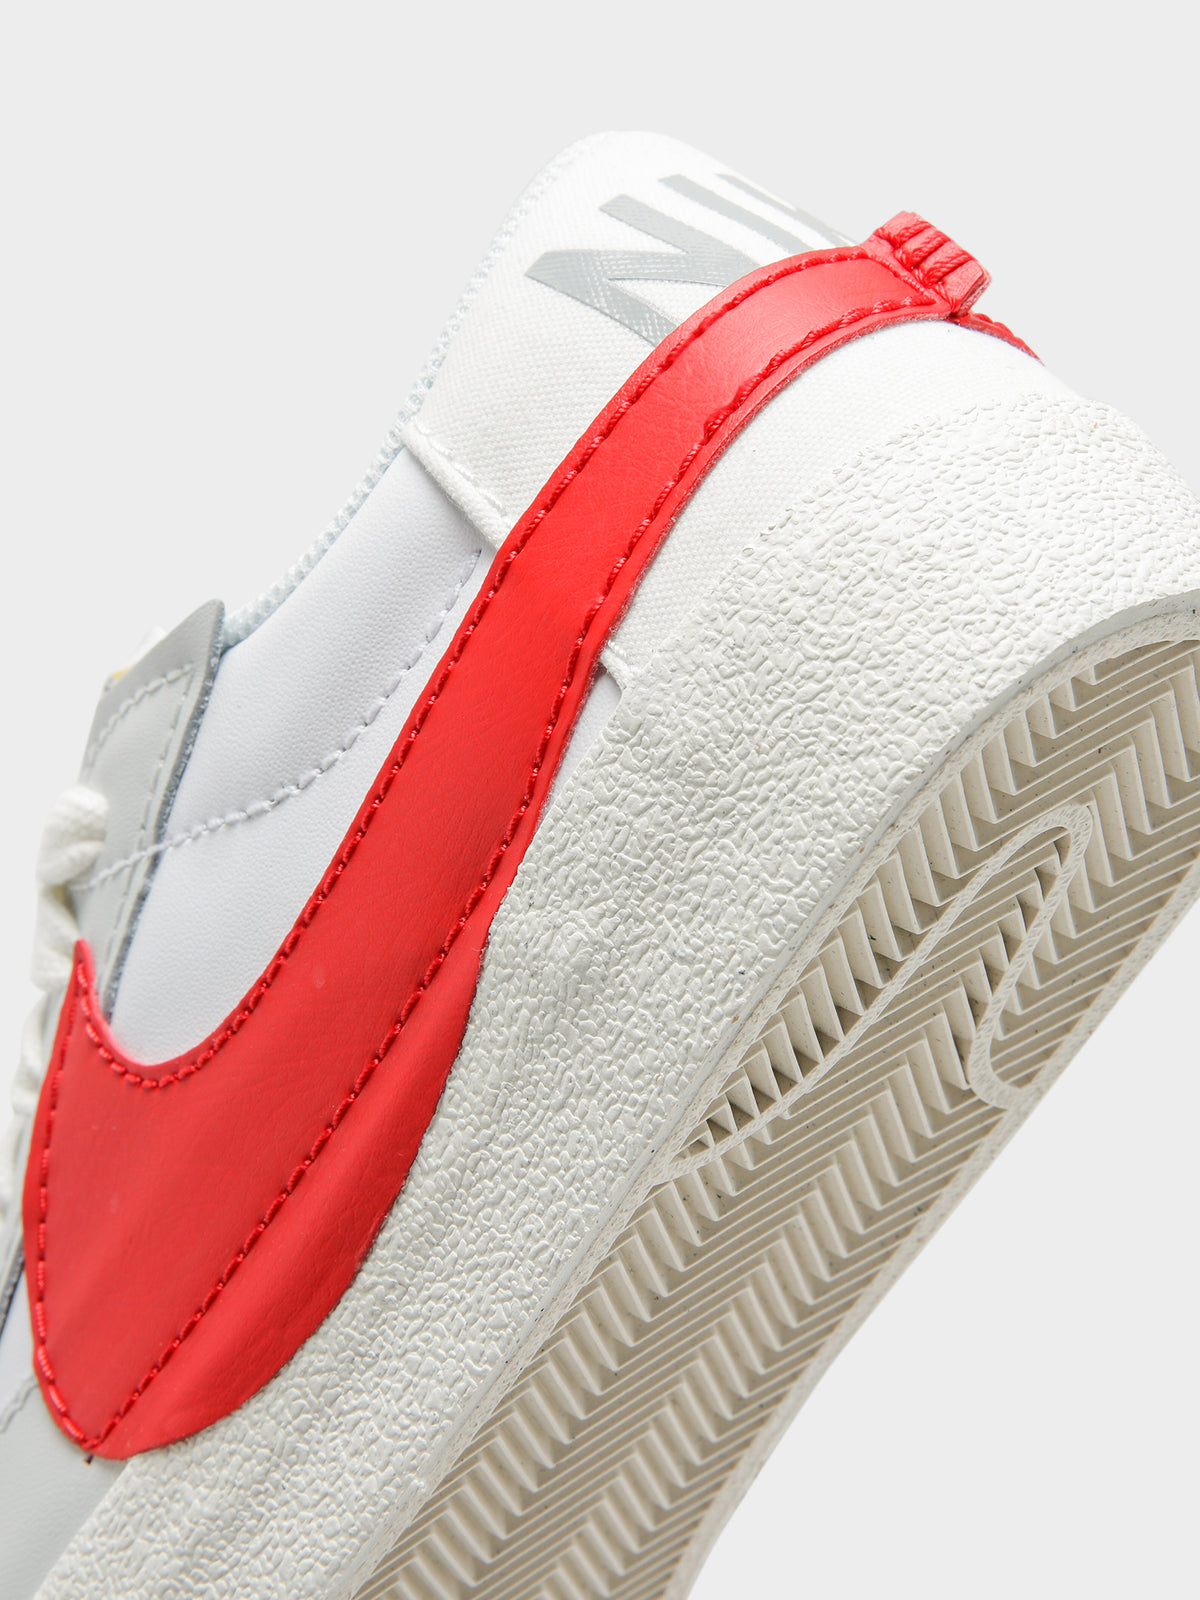 Mens Blazer Low &#39;77 Sneakers in White &amp; Red